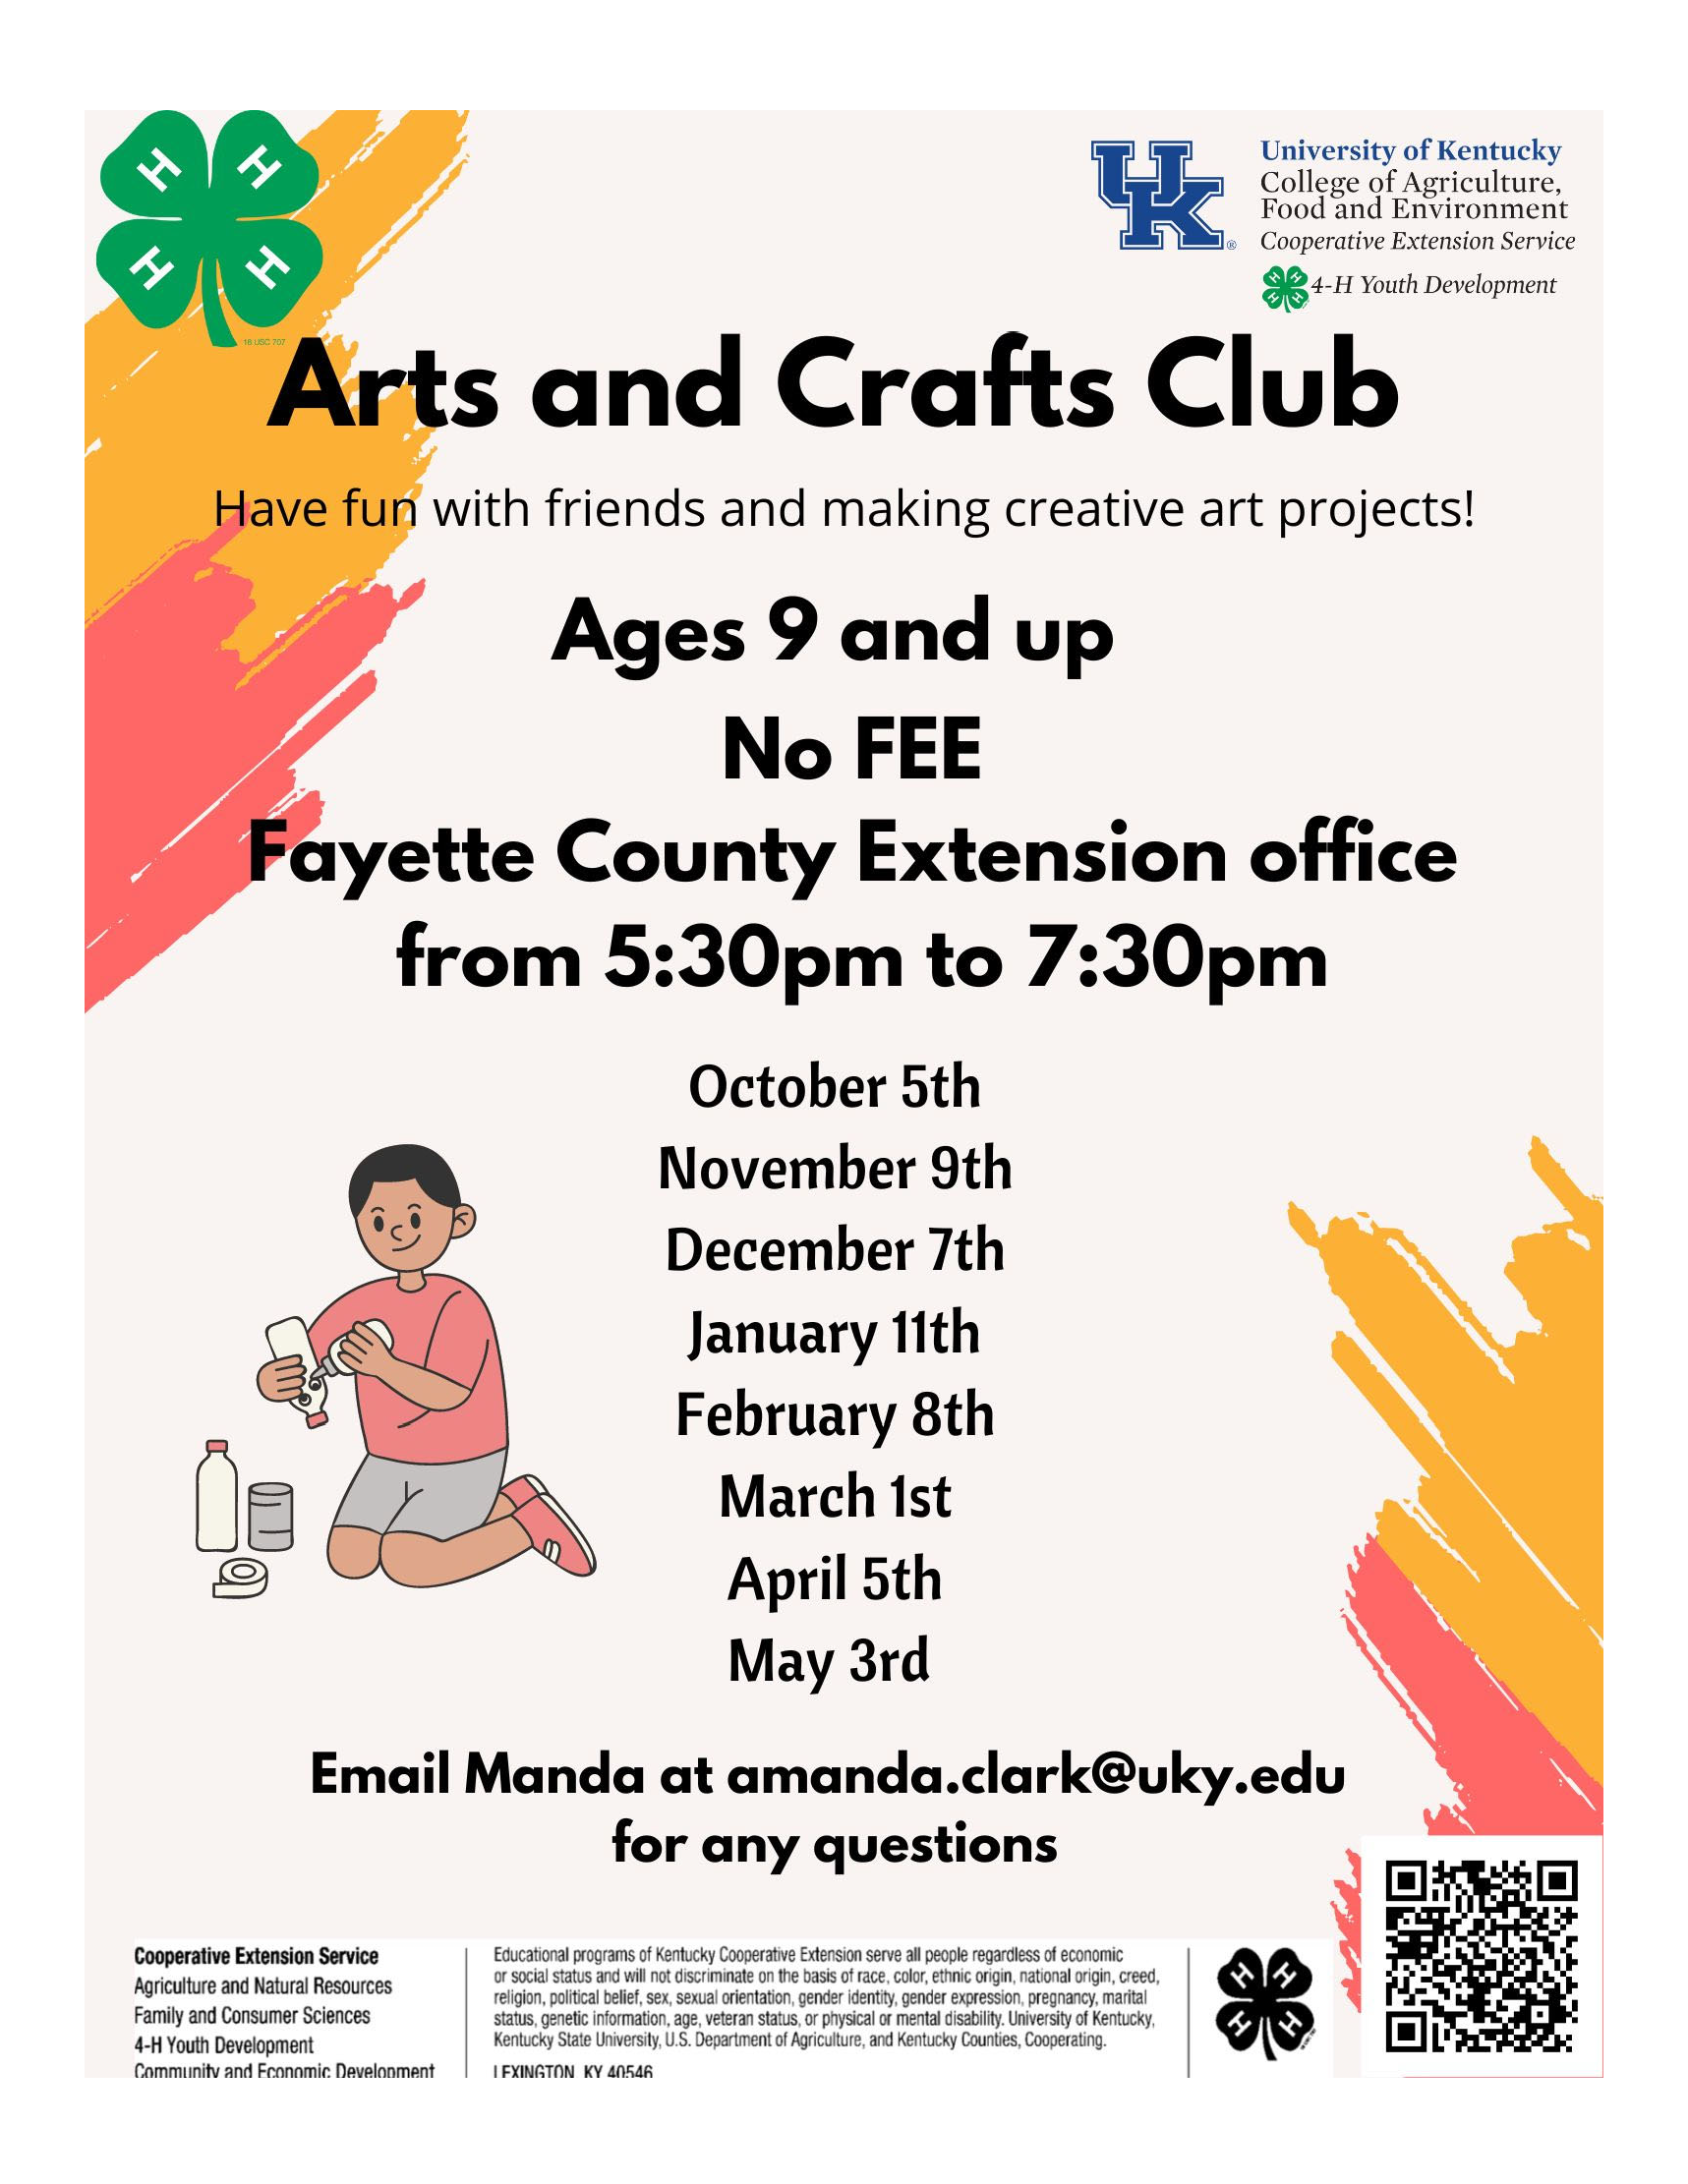 4-H Arts and Crafts Club